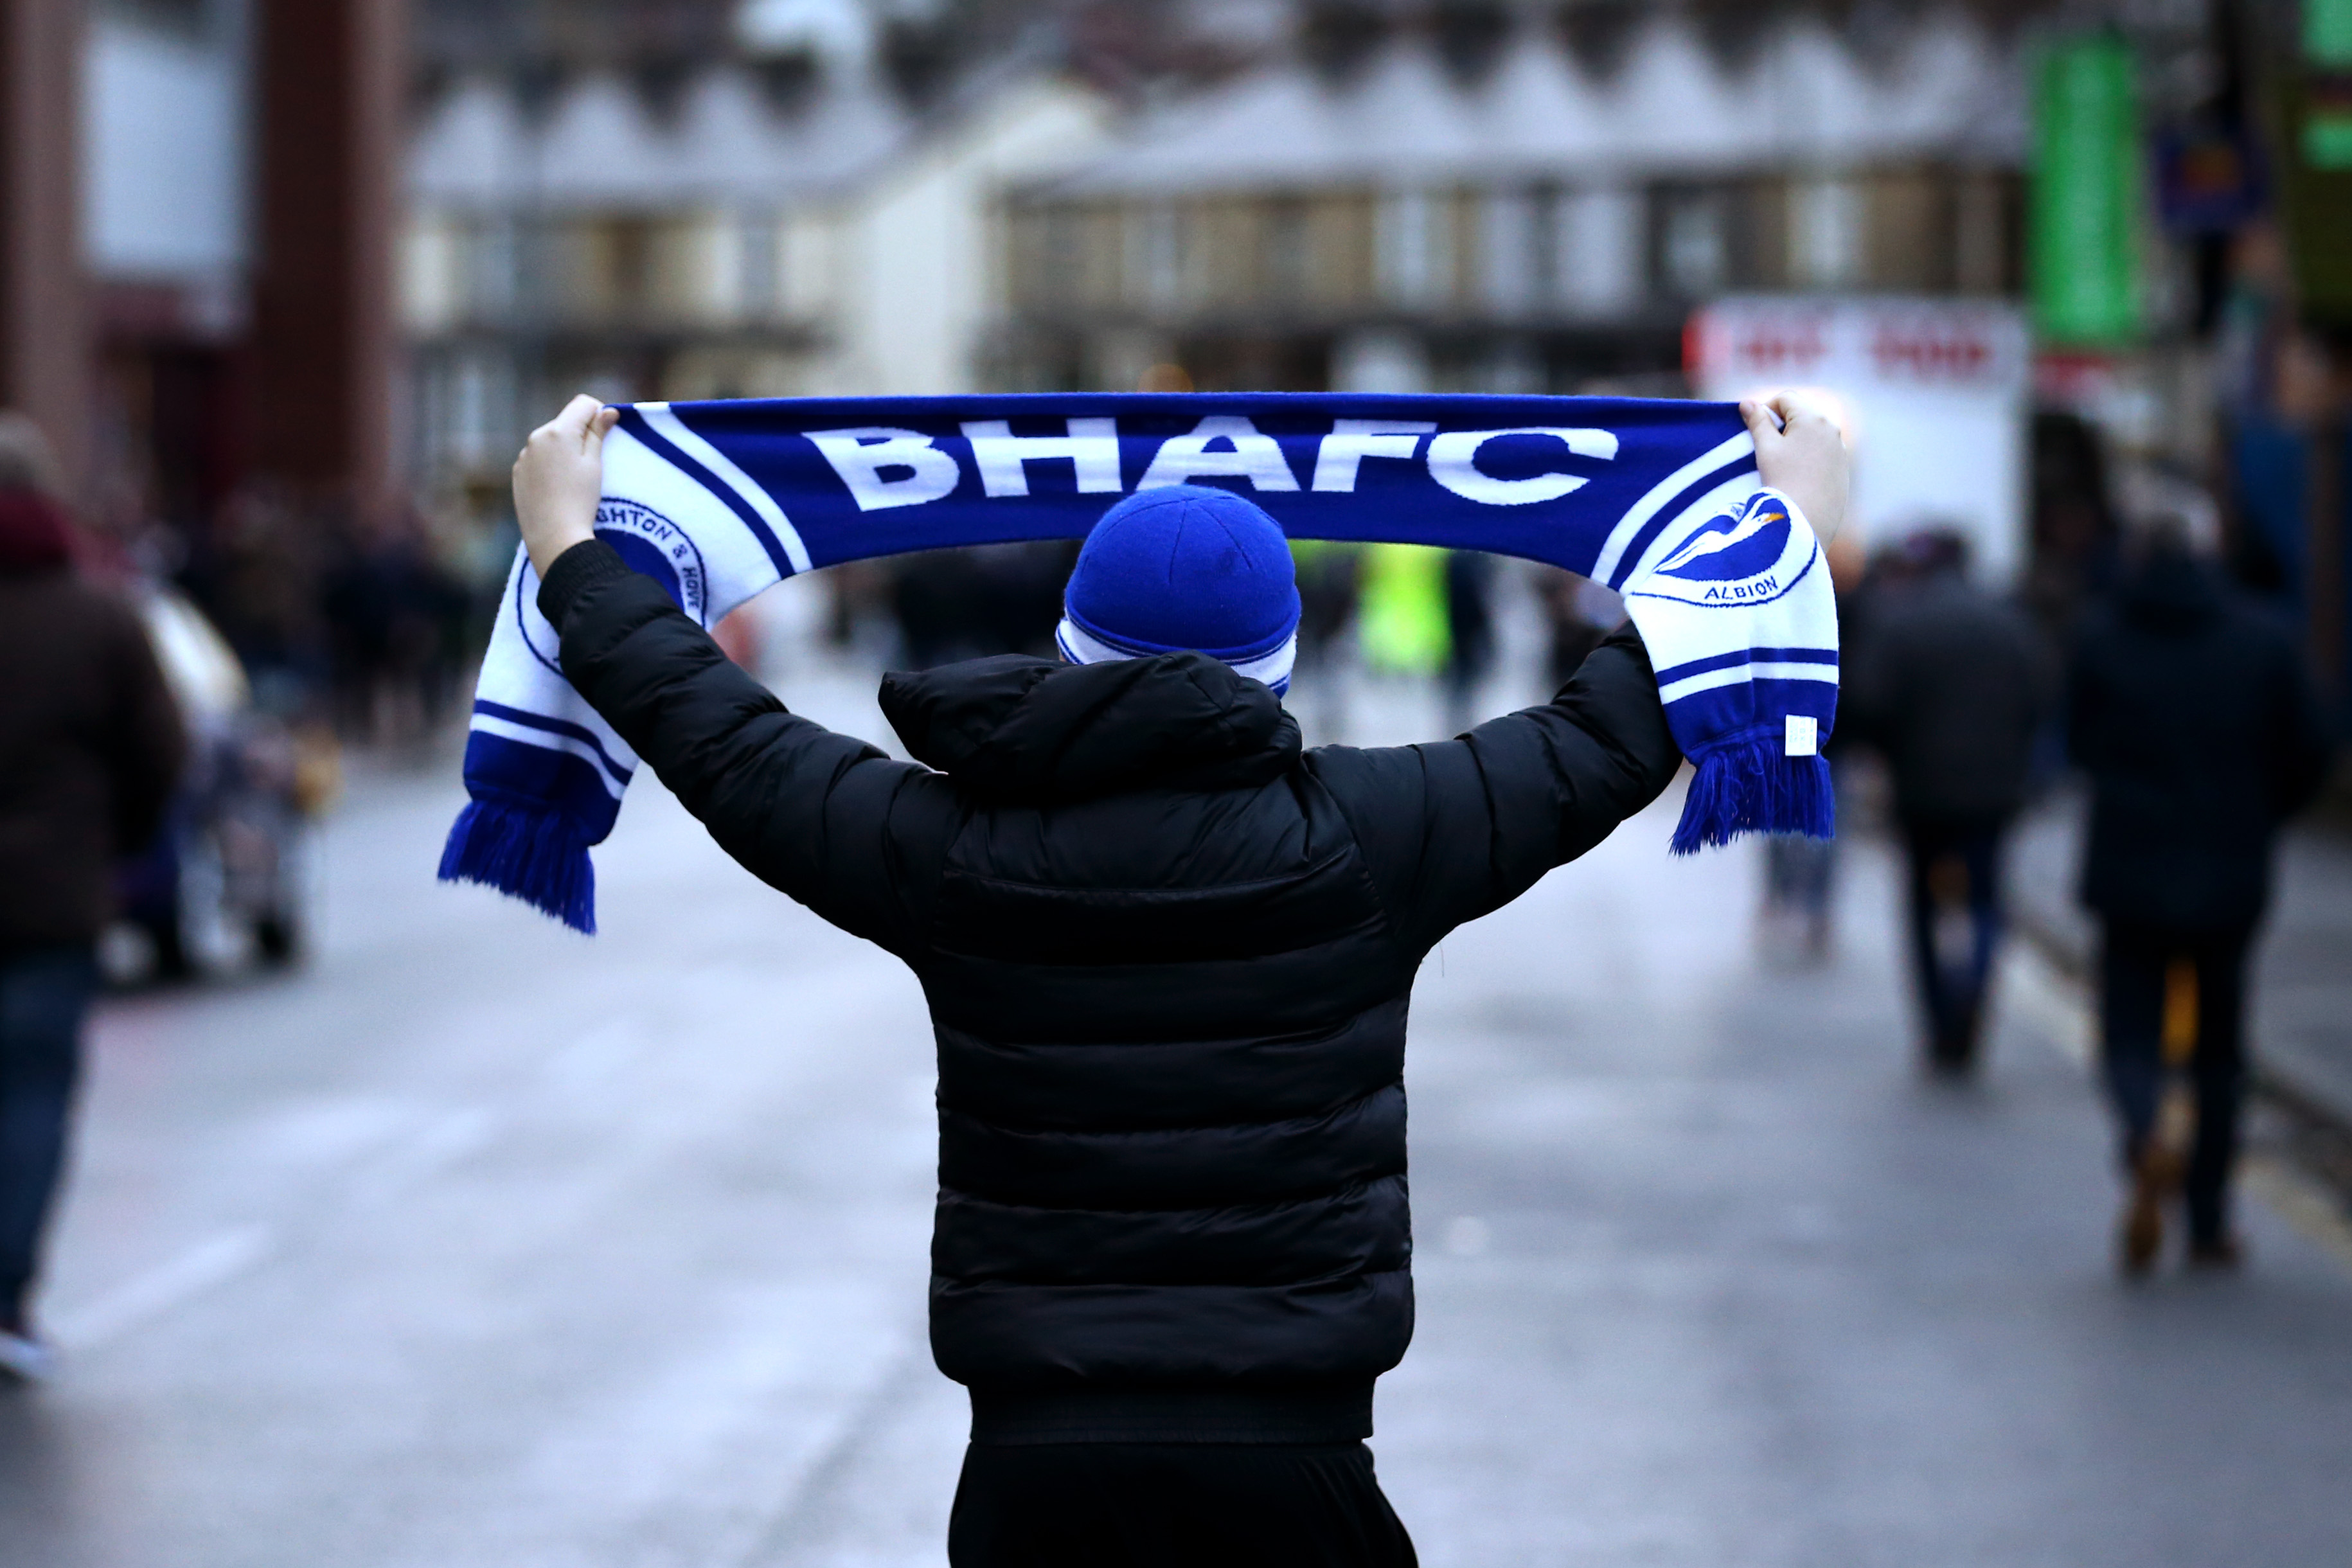 BURNLEY, ENGLAND - DECEMBER 08: A Brighton and Hove Albion fan holds up a scarf prior to the Premier League match between Burnley FC and Brighton & Hove Albion at Turf Moor on December 8, 2018 in Burnley, United Kingdom.  (Photo by Jan Kruger/Getty Images)